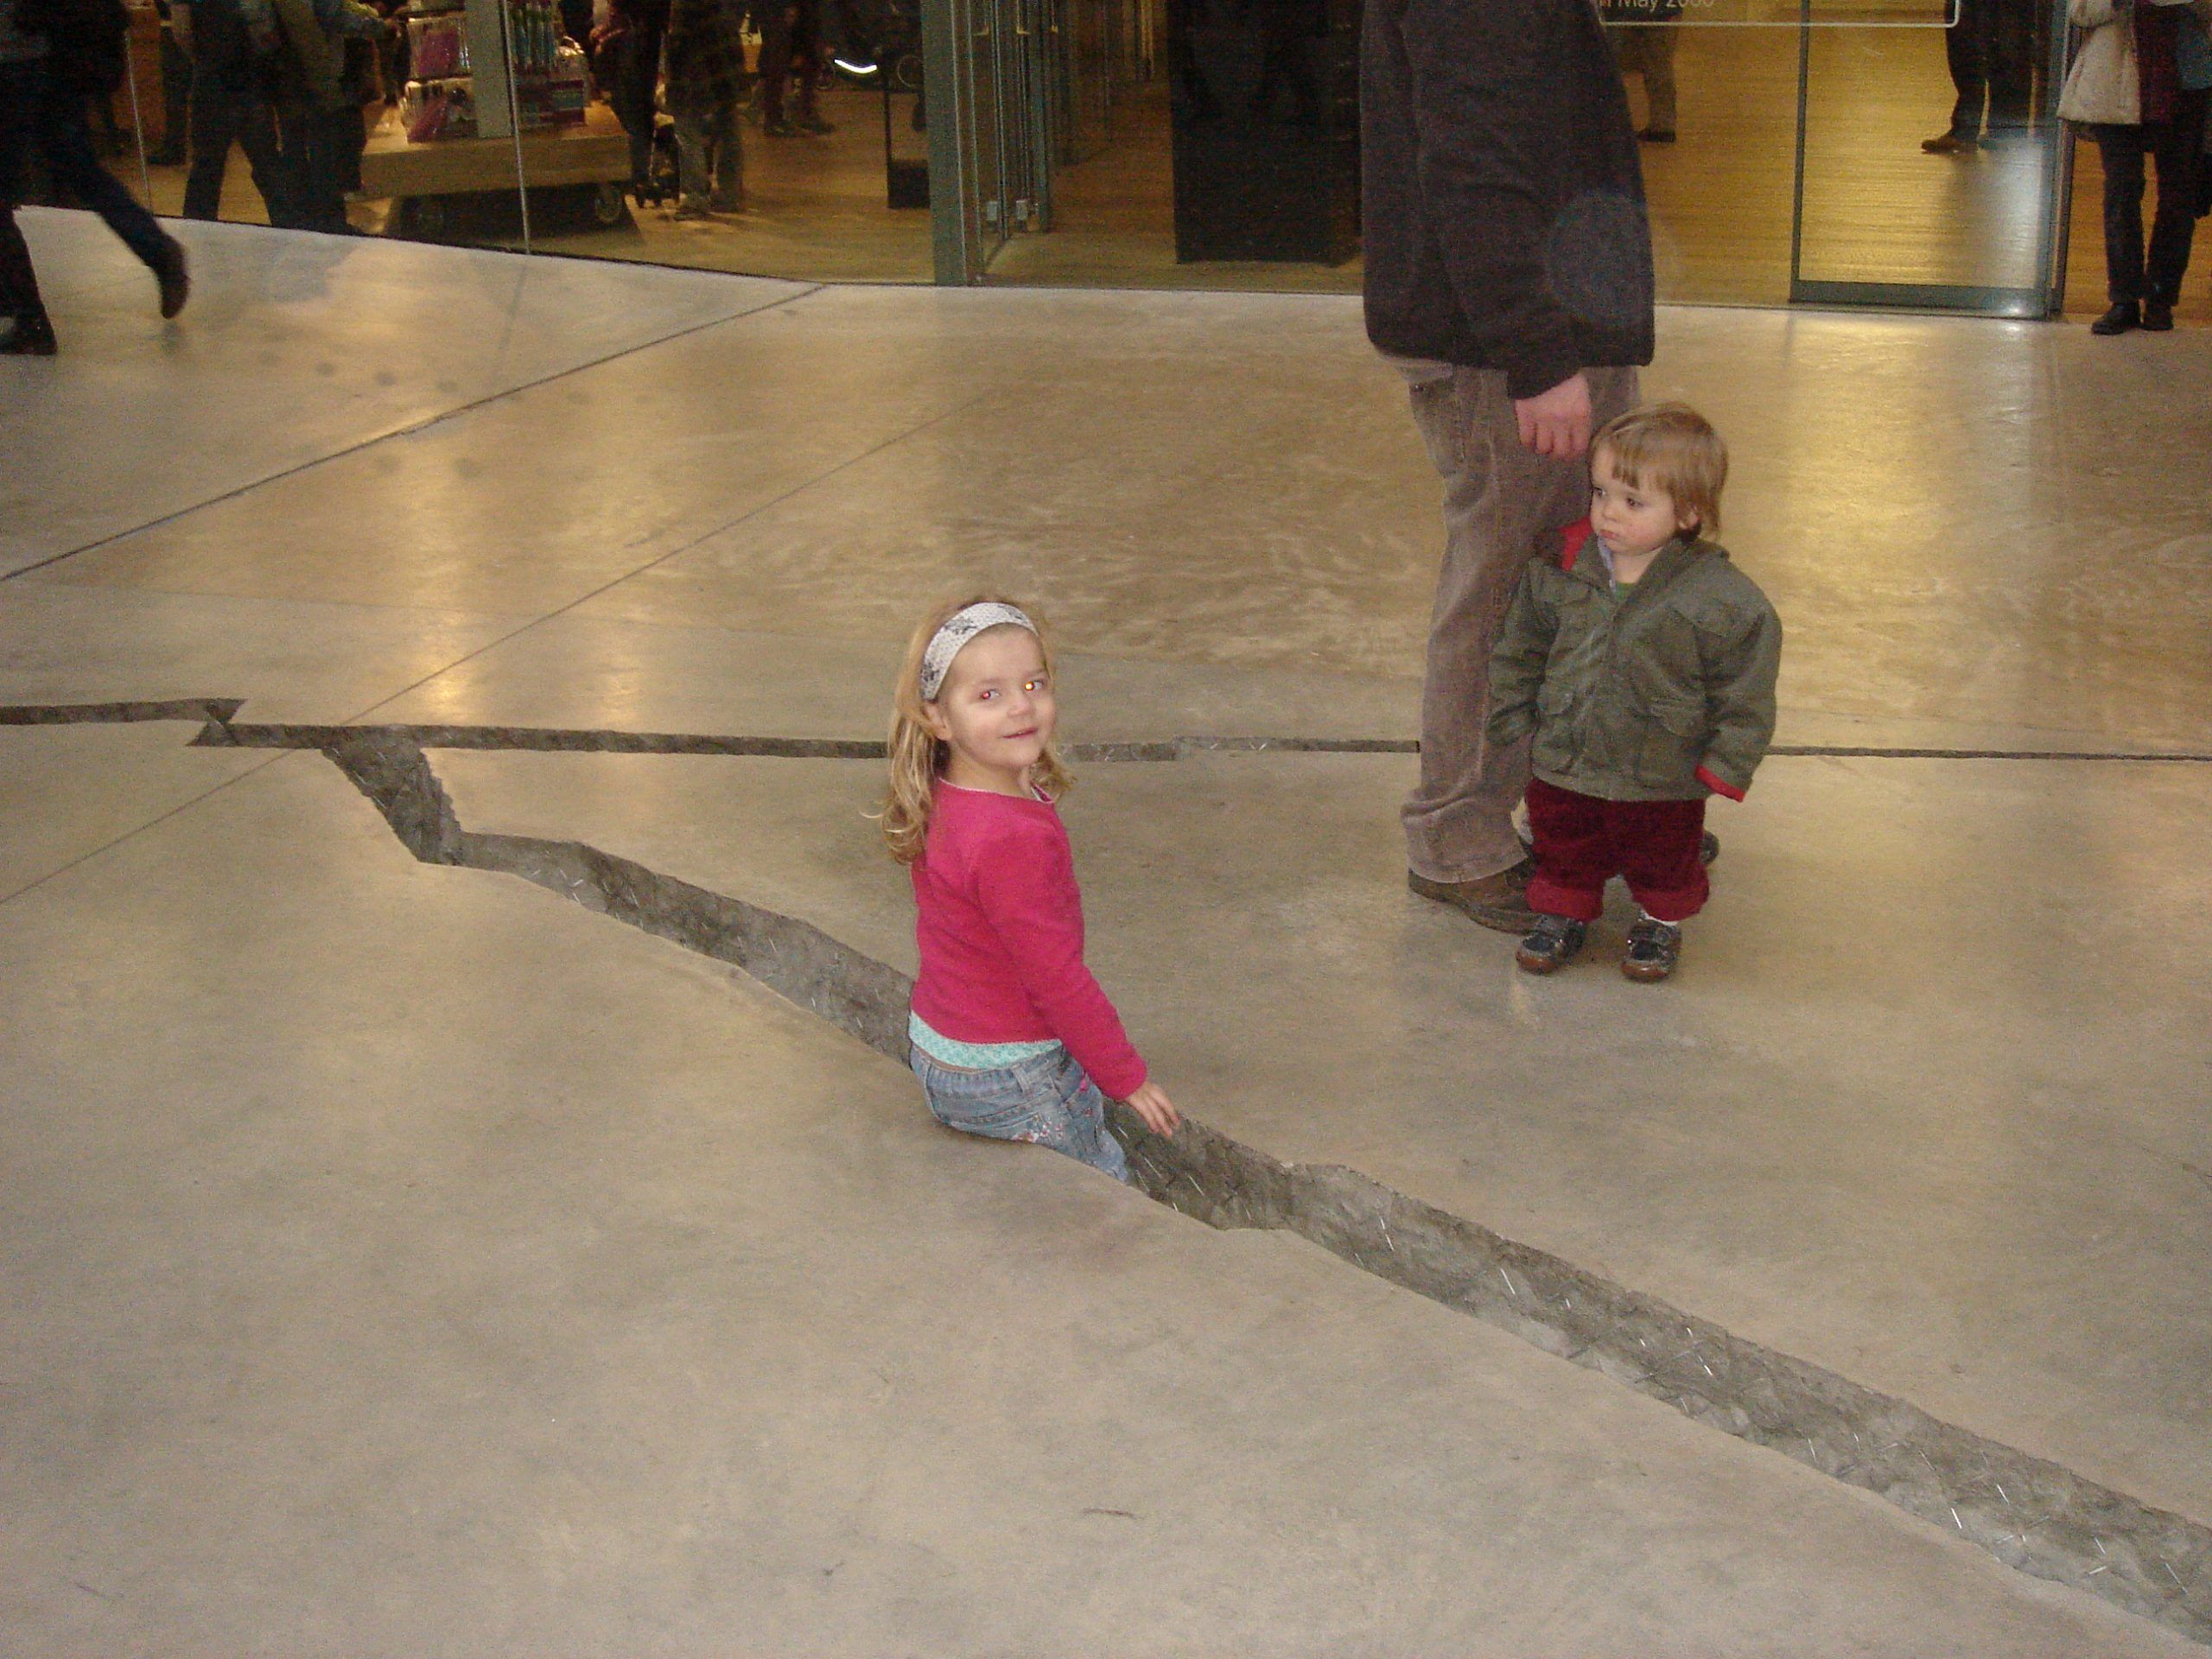 A small girl is standing in a crack in a concrete floor, looking at us. A tiny toddler is holding a parent's hand and looking over at her.